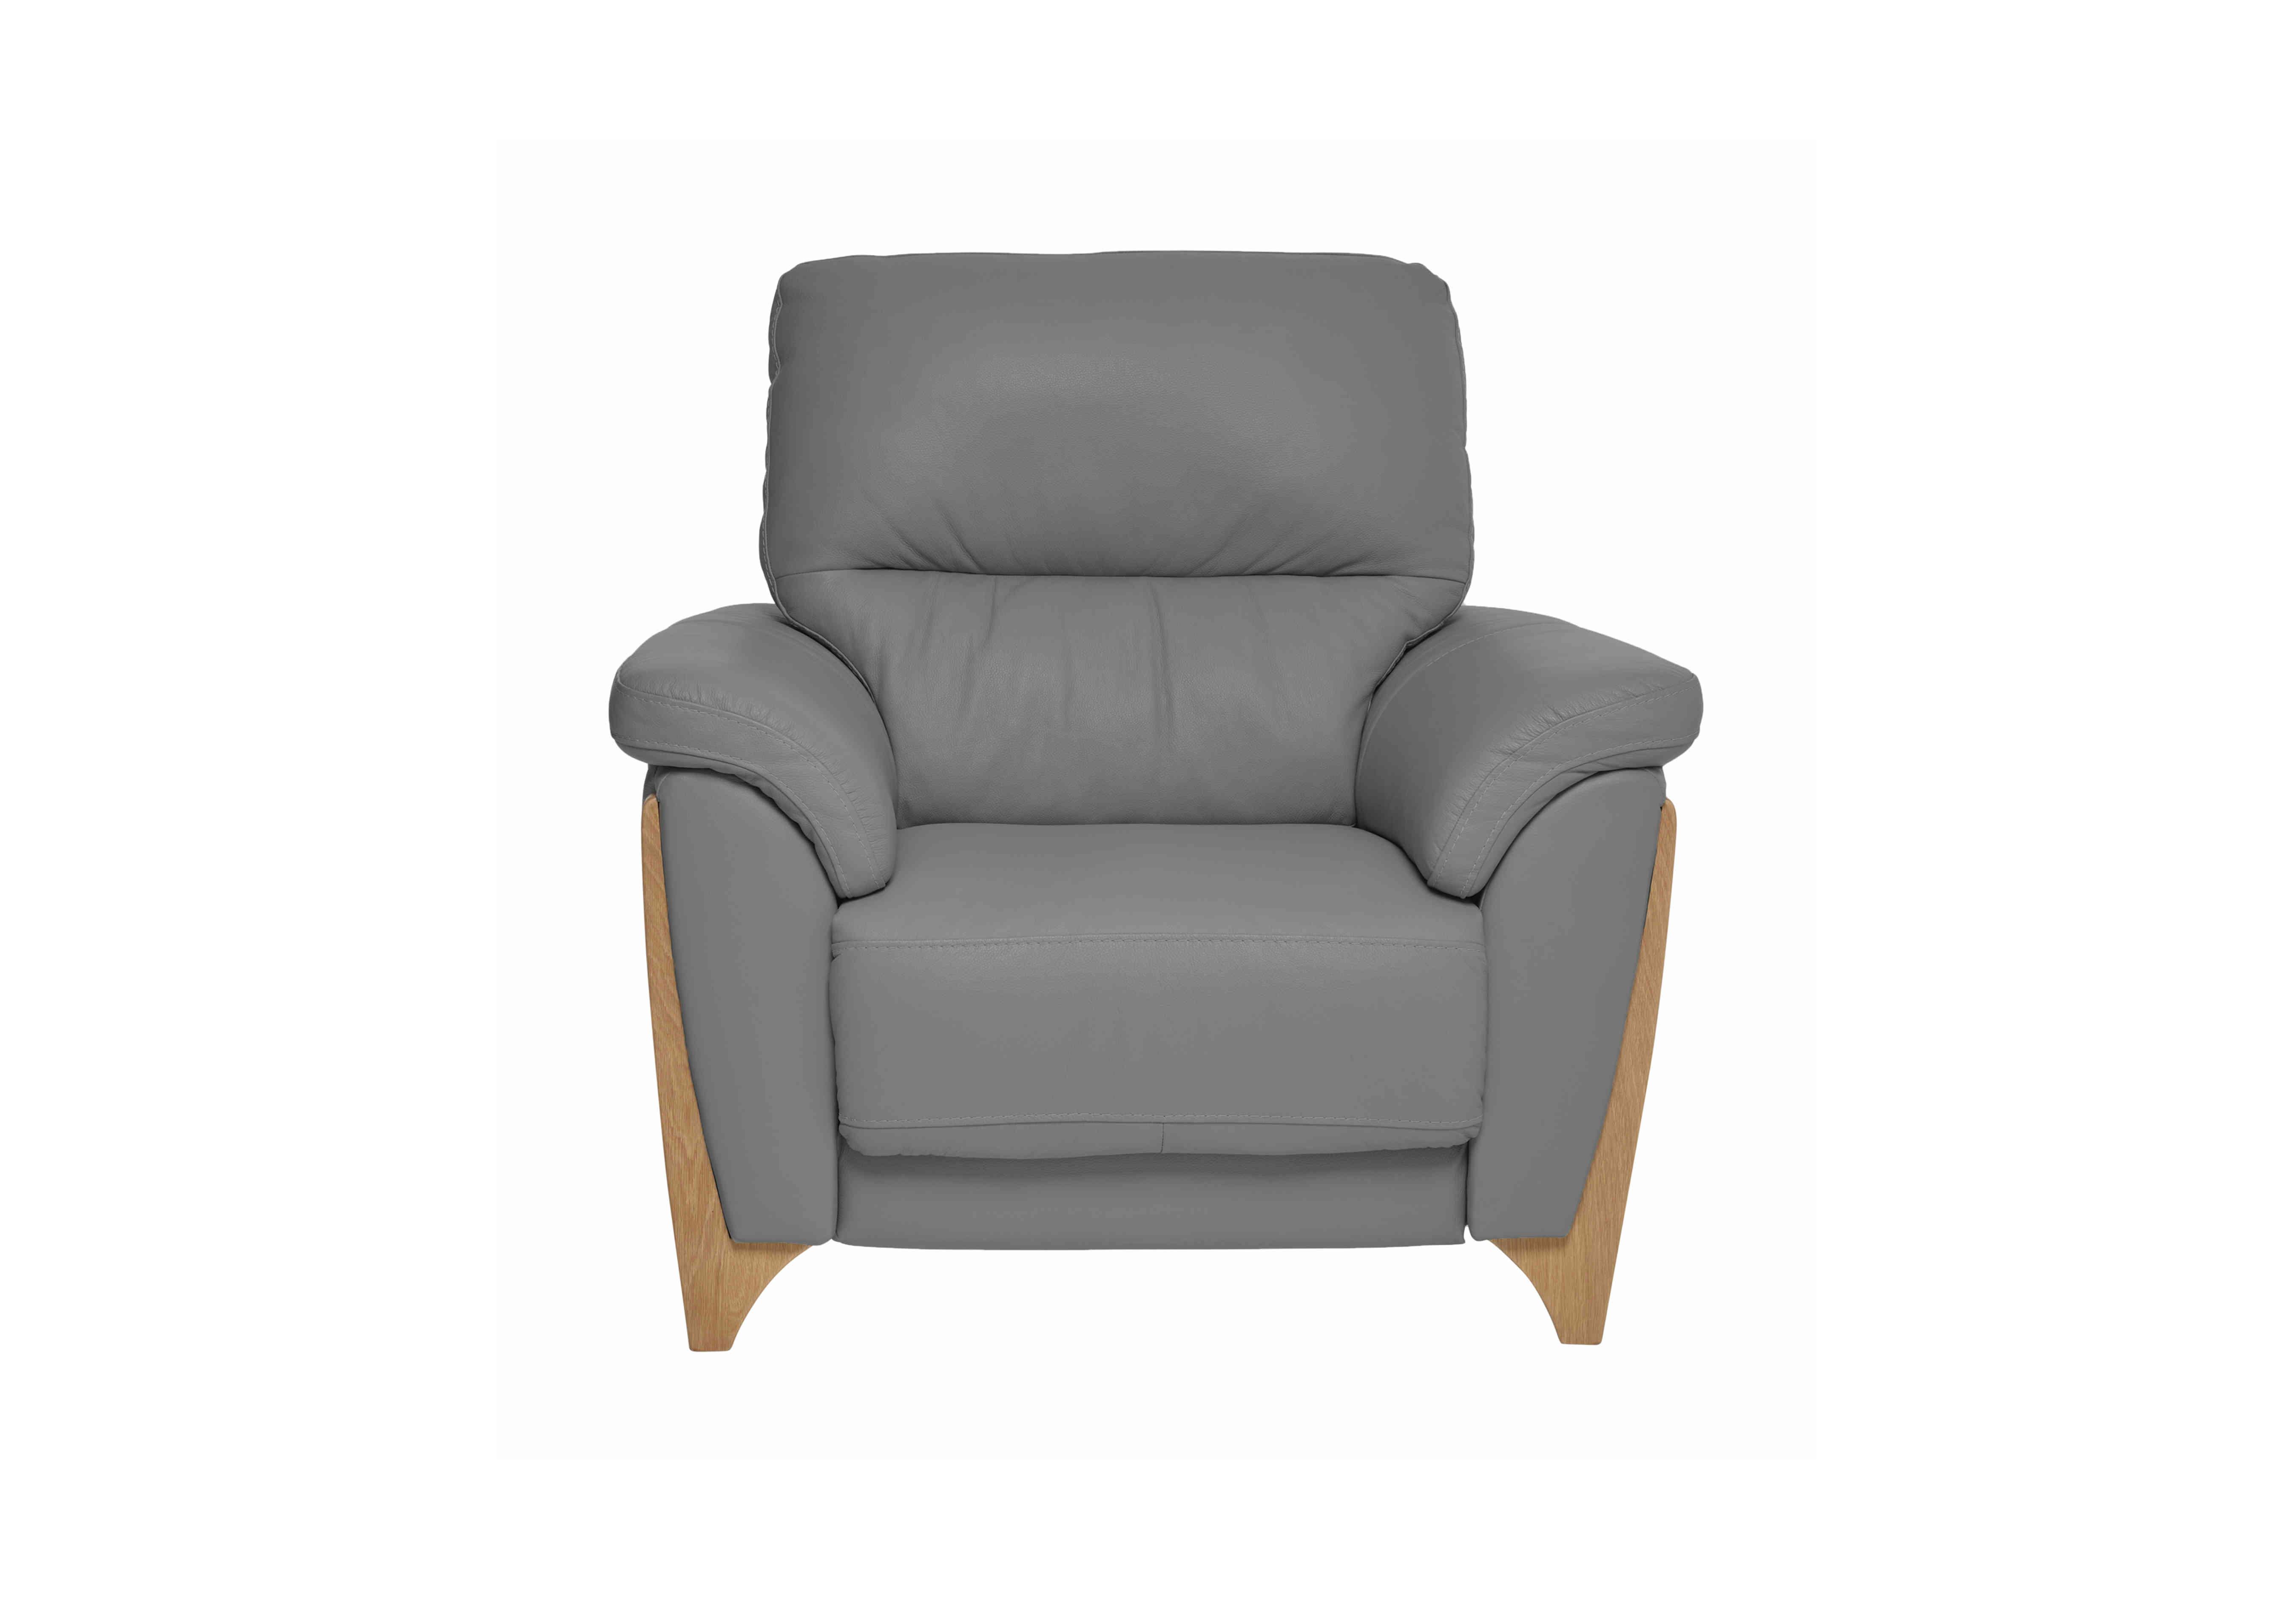 Enna Leather Power Recliner Armchair in L956 on Furniture Village